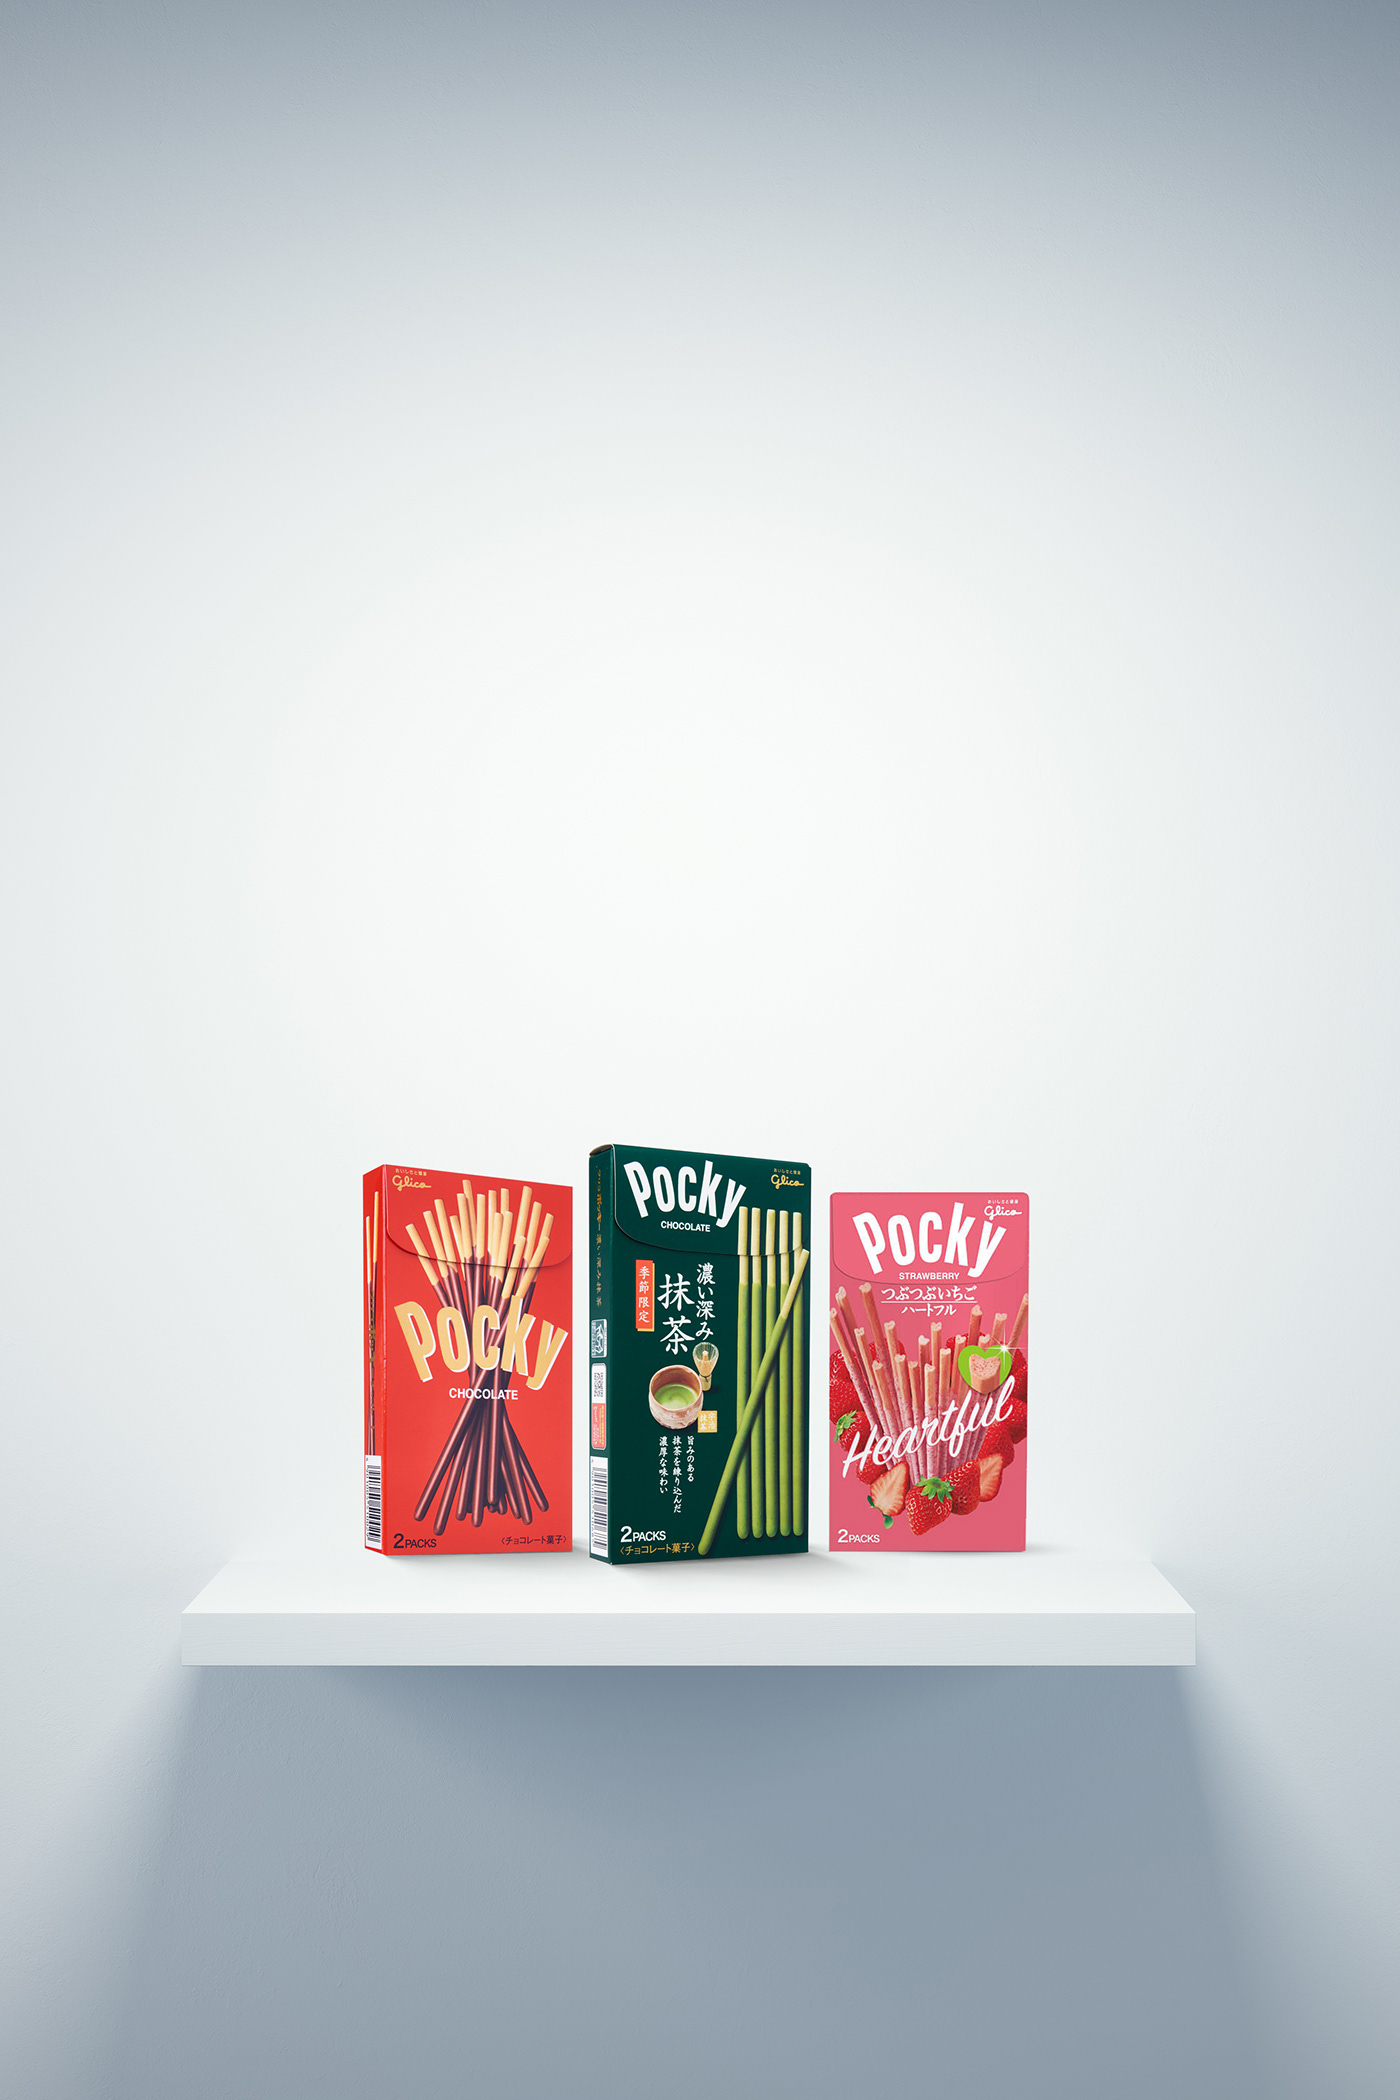 adidas pocky Collaboration feat shoes lifestyle japan footwear boost flavors